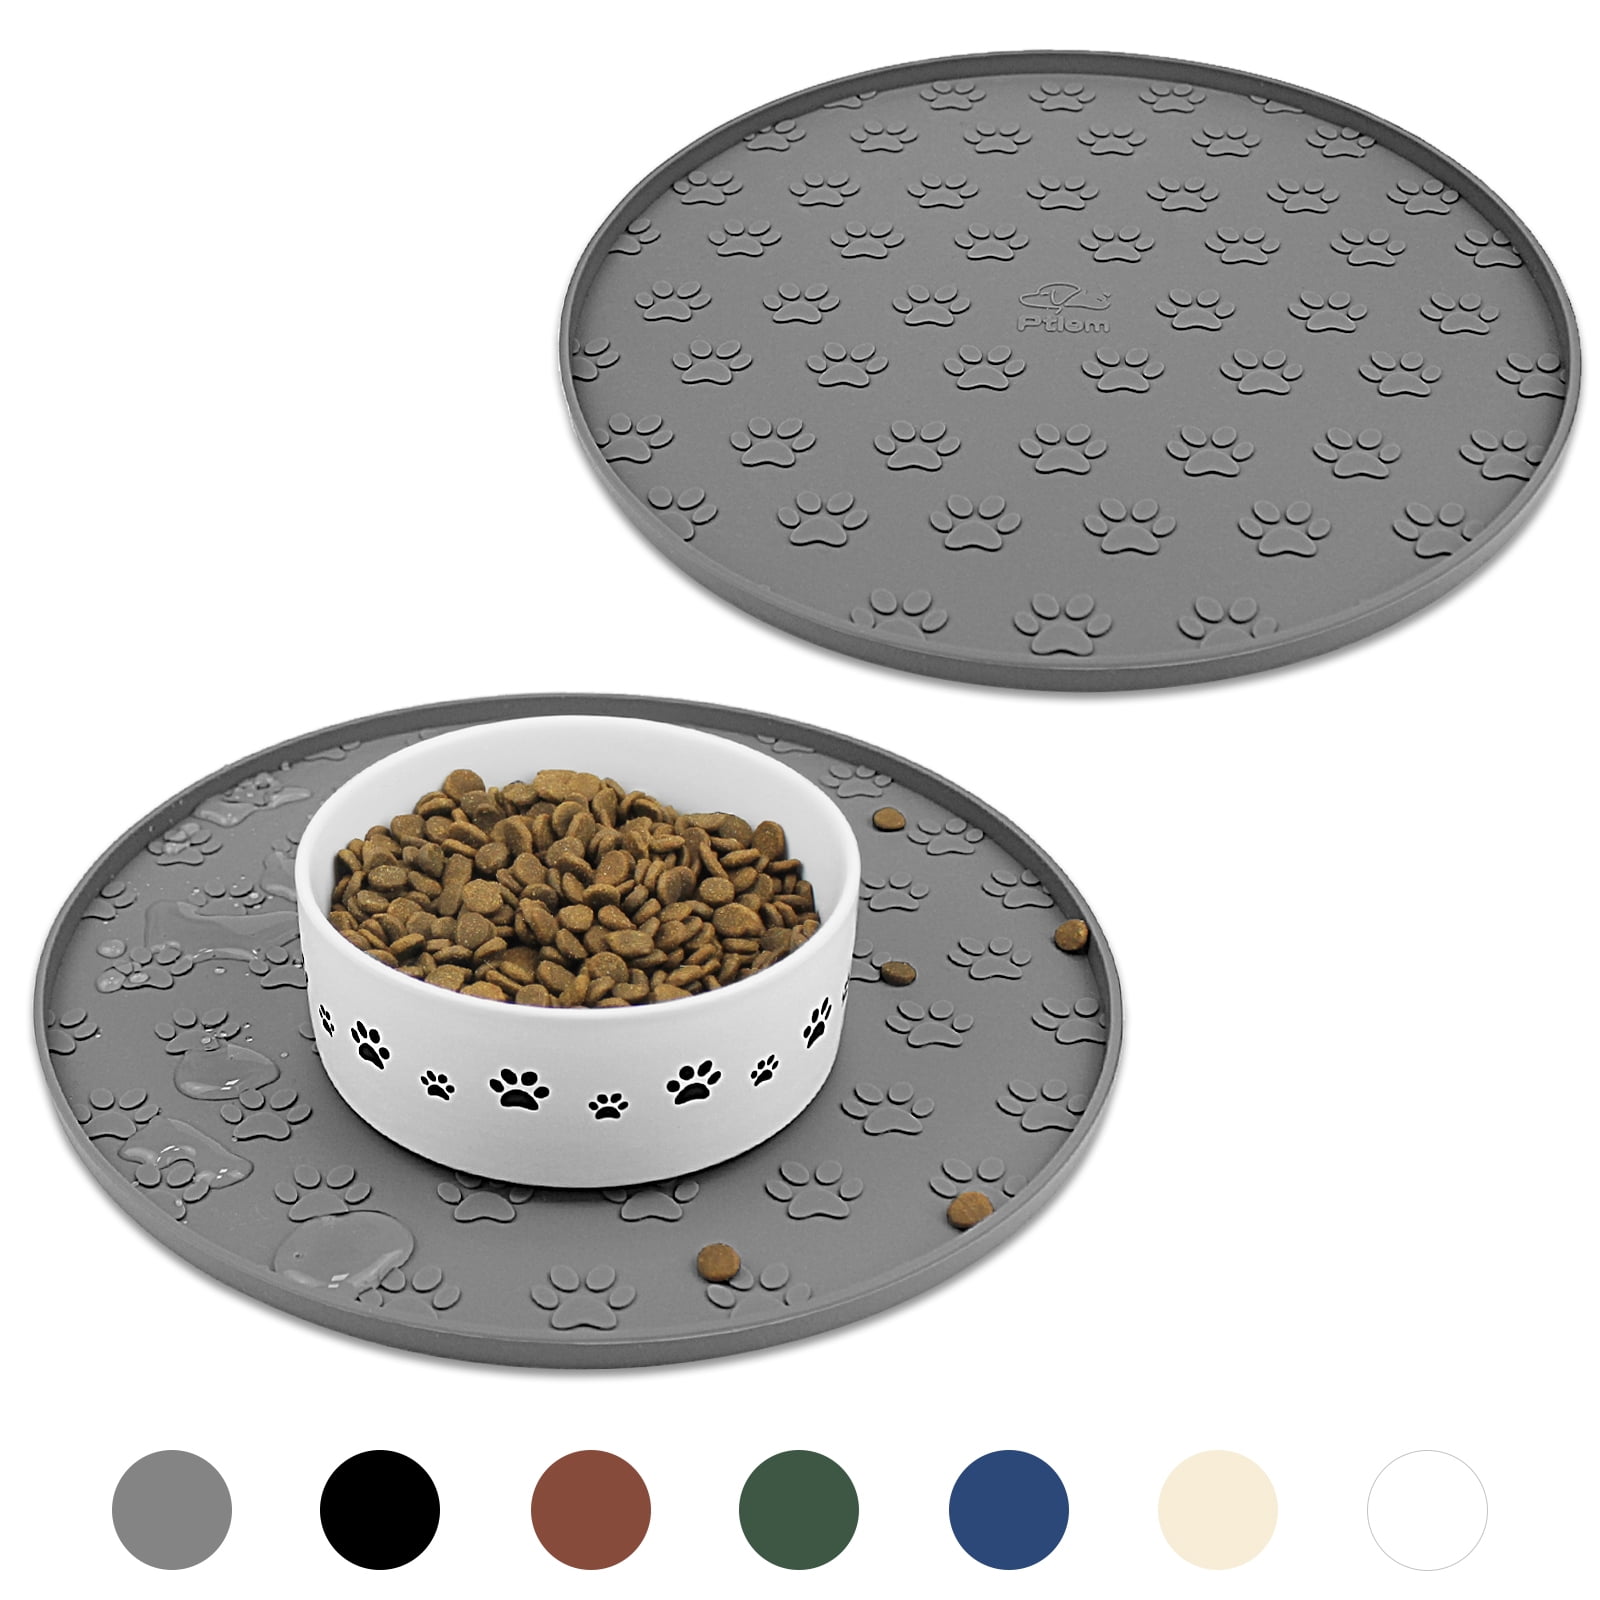 AVERYDAY 32x24'' Large Silicone Cat Dog Food Water Bowl Mat Fits Multi Pet  Feeding Stations, 0.63 High Edge Dog Food Mats for Floors Waterproof